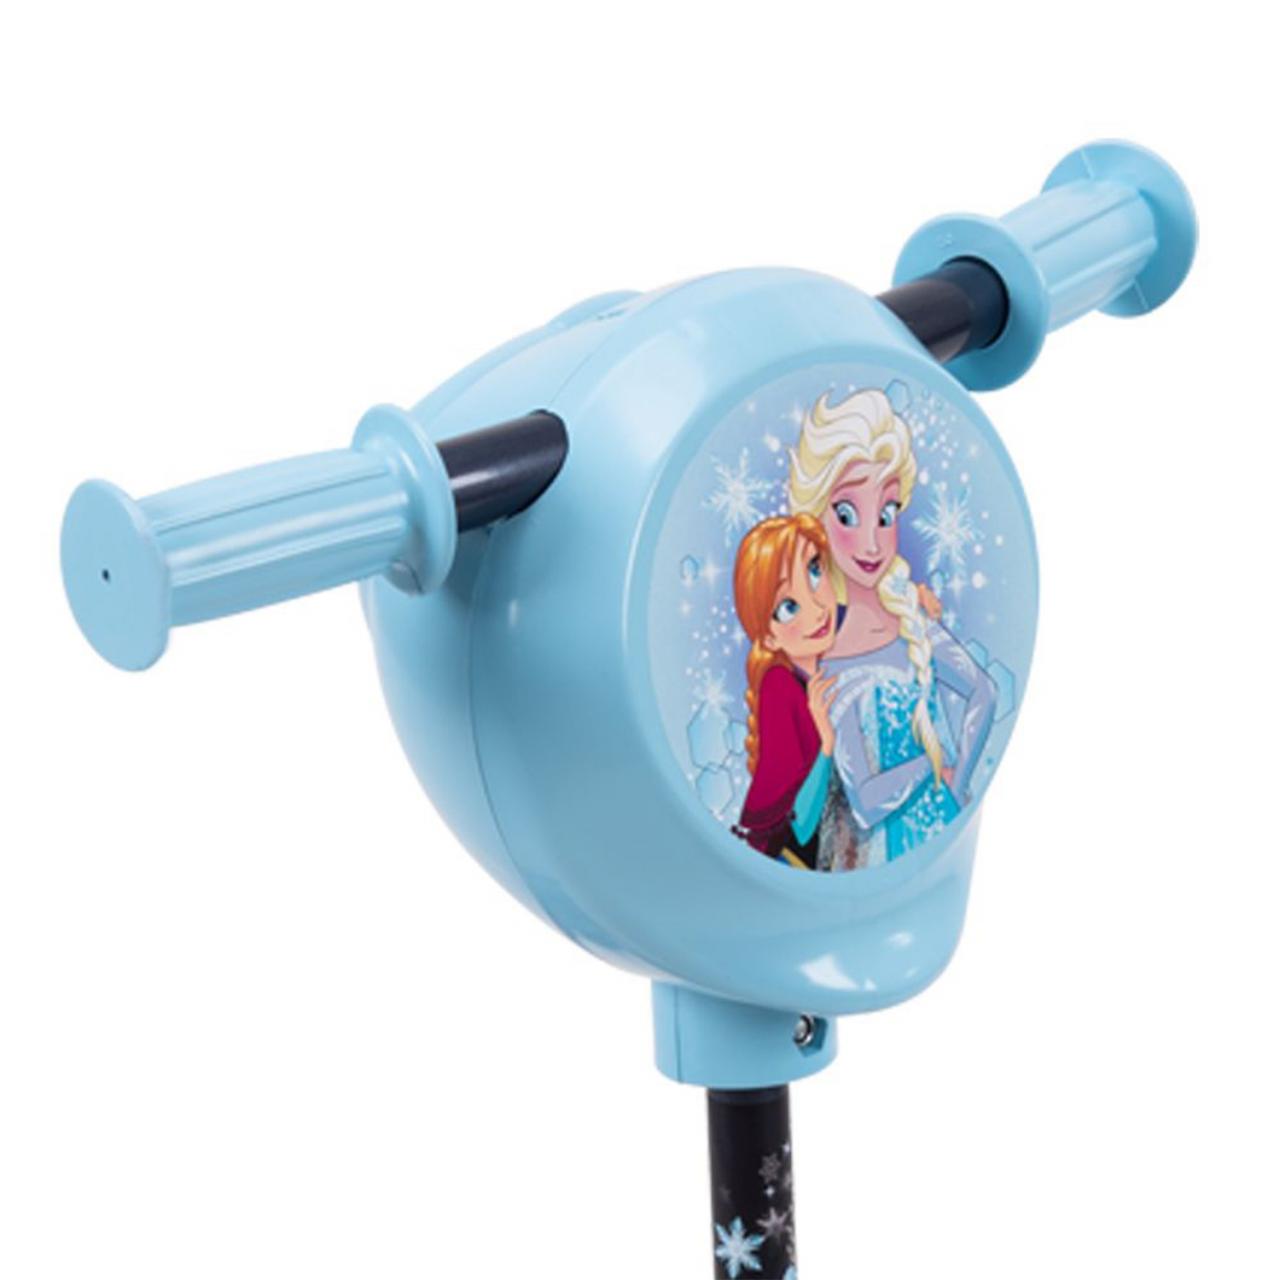 Huffy 38679 Disney Frozen Girls' Toddler Scooter with Storage, Blue